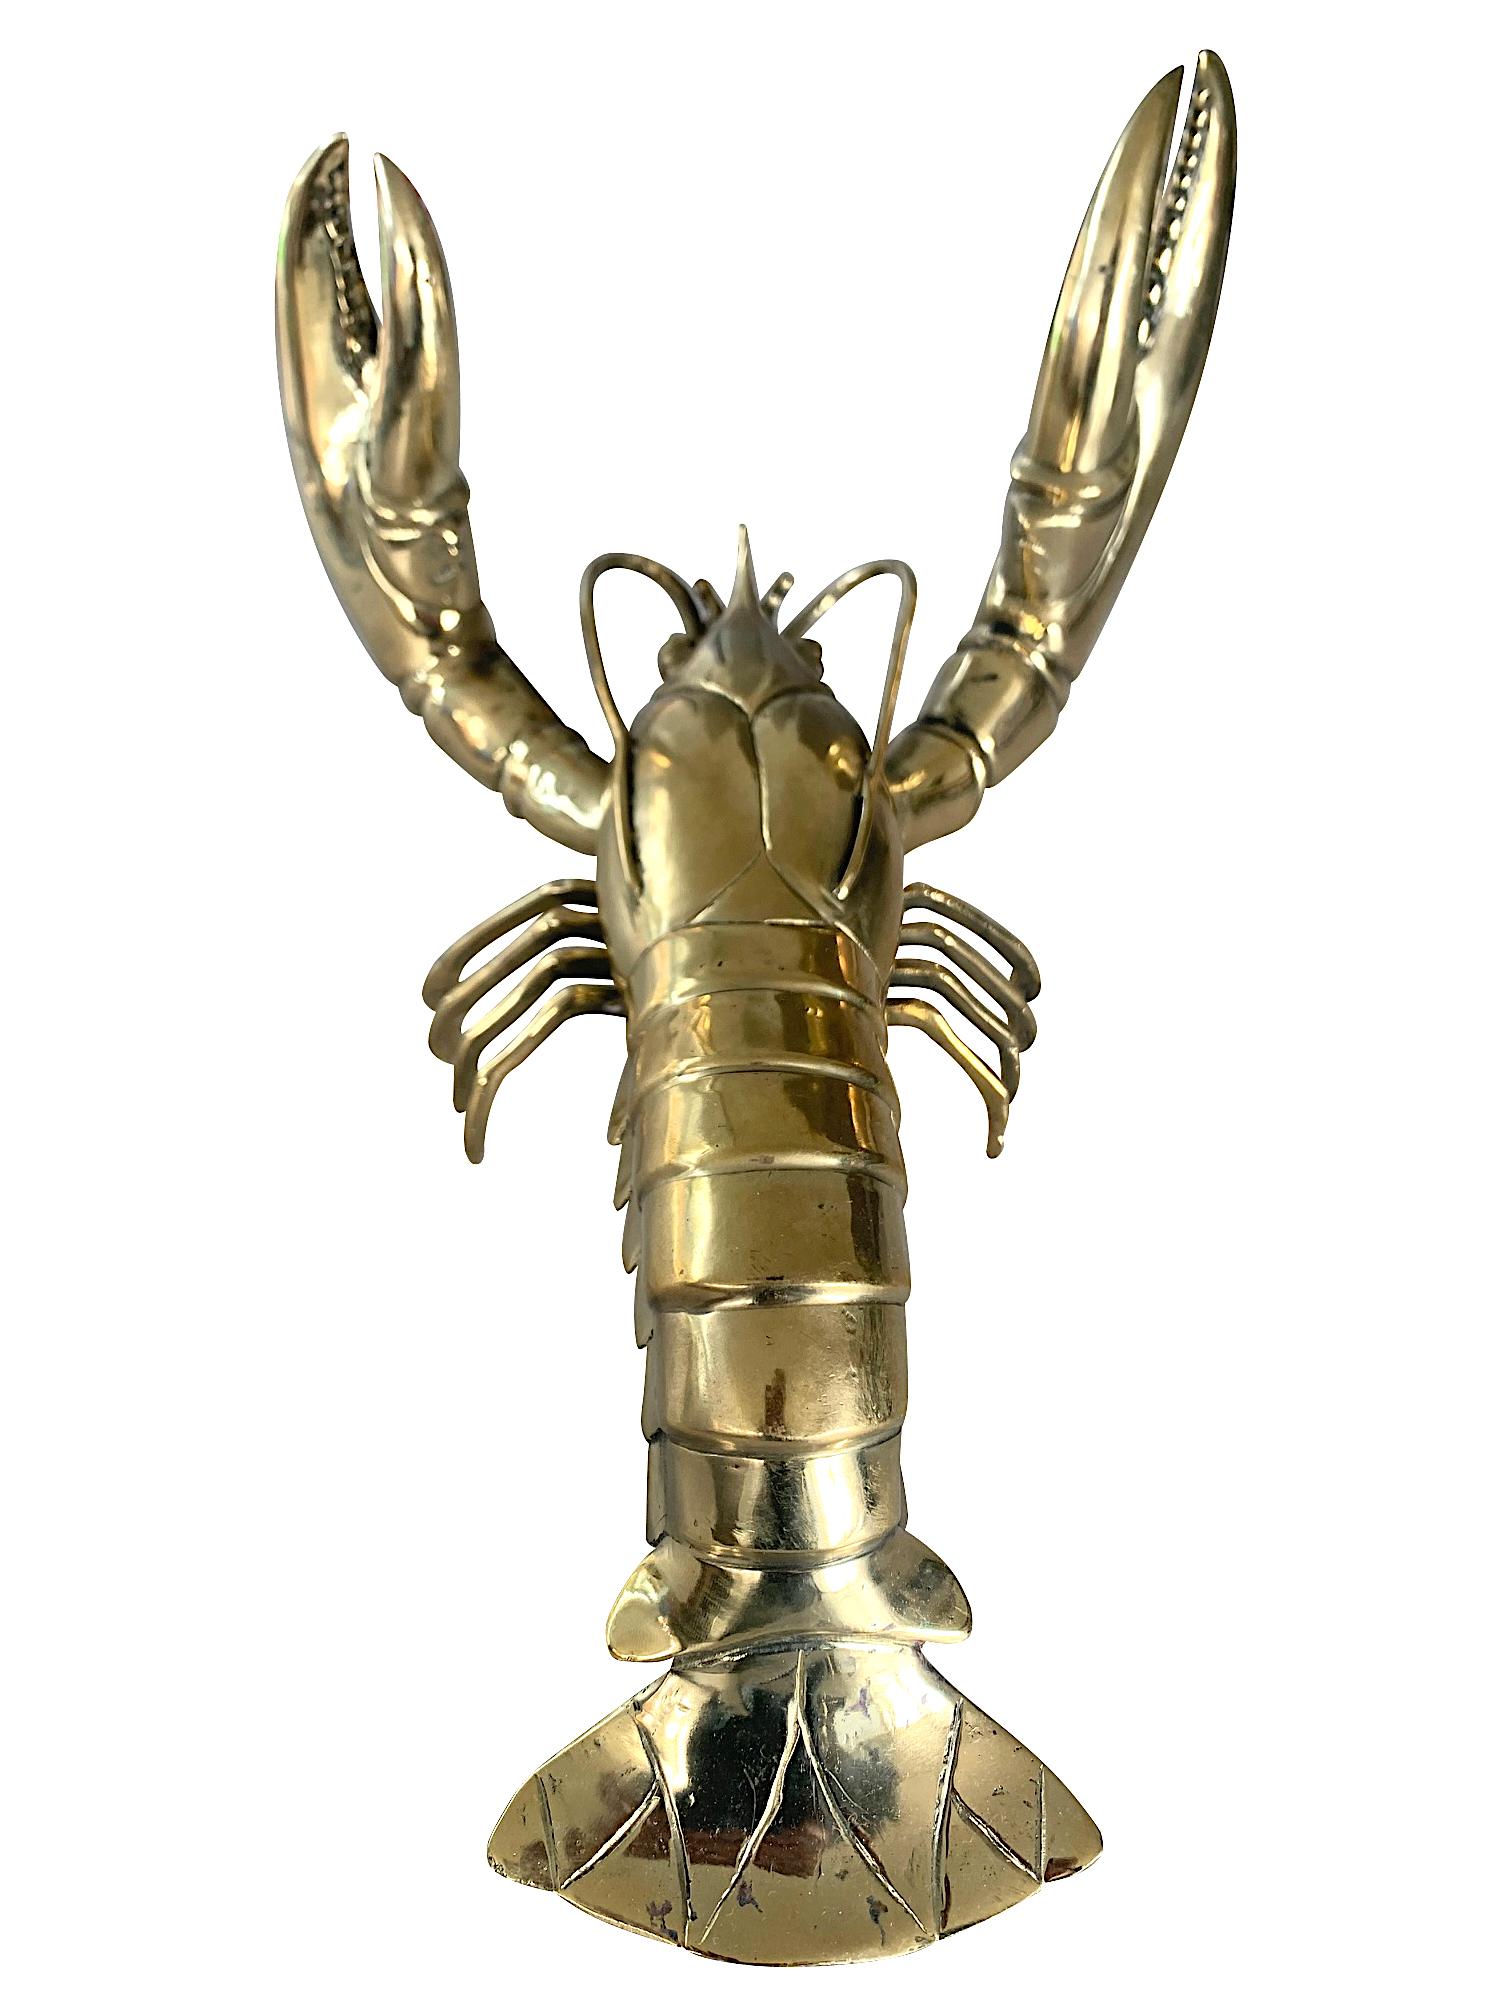 1960s Life-Size Solid Brass Lobster Sculpture with Exquisite Detail 2